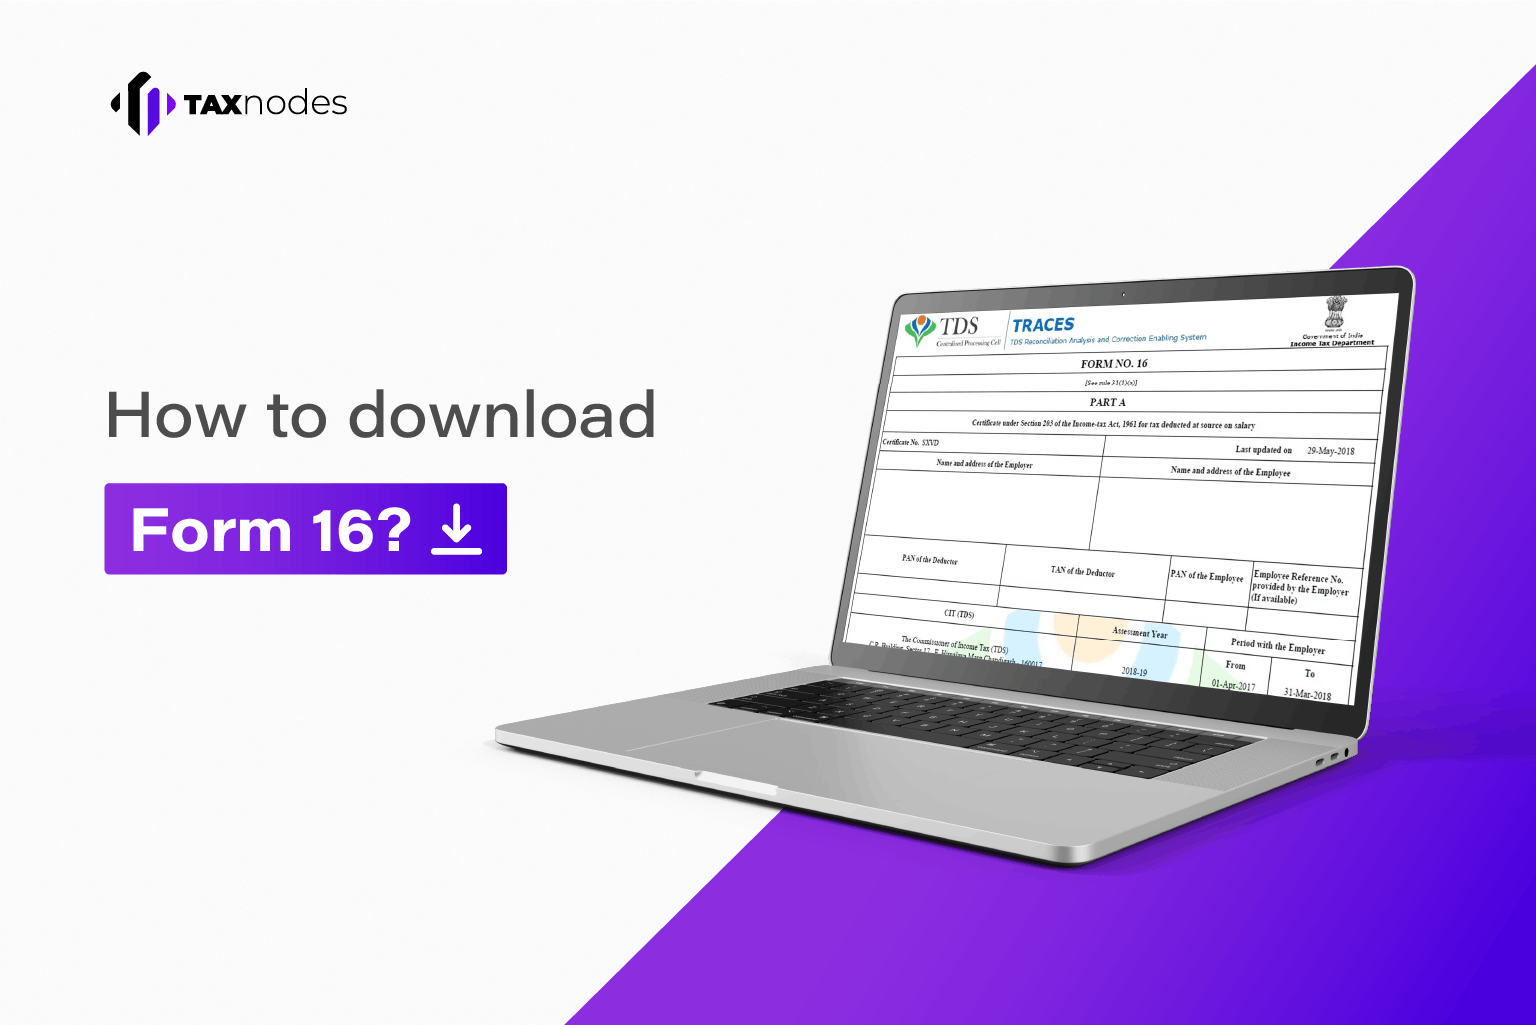 What is form 16? How to download form 16?